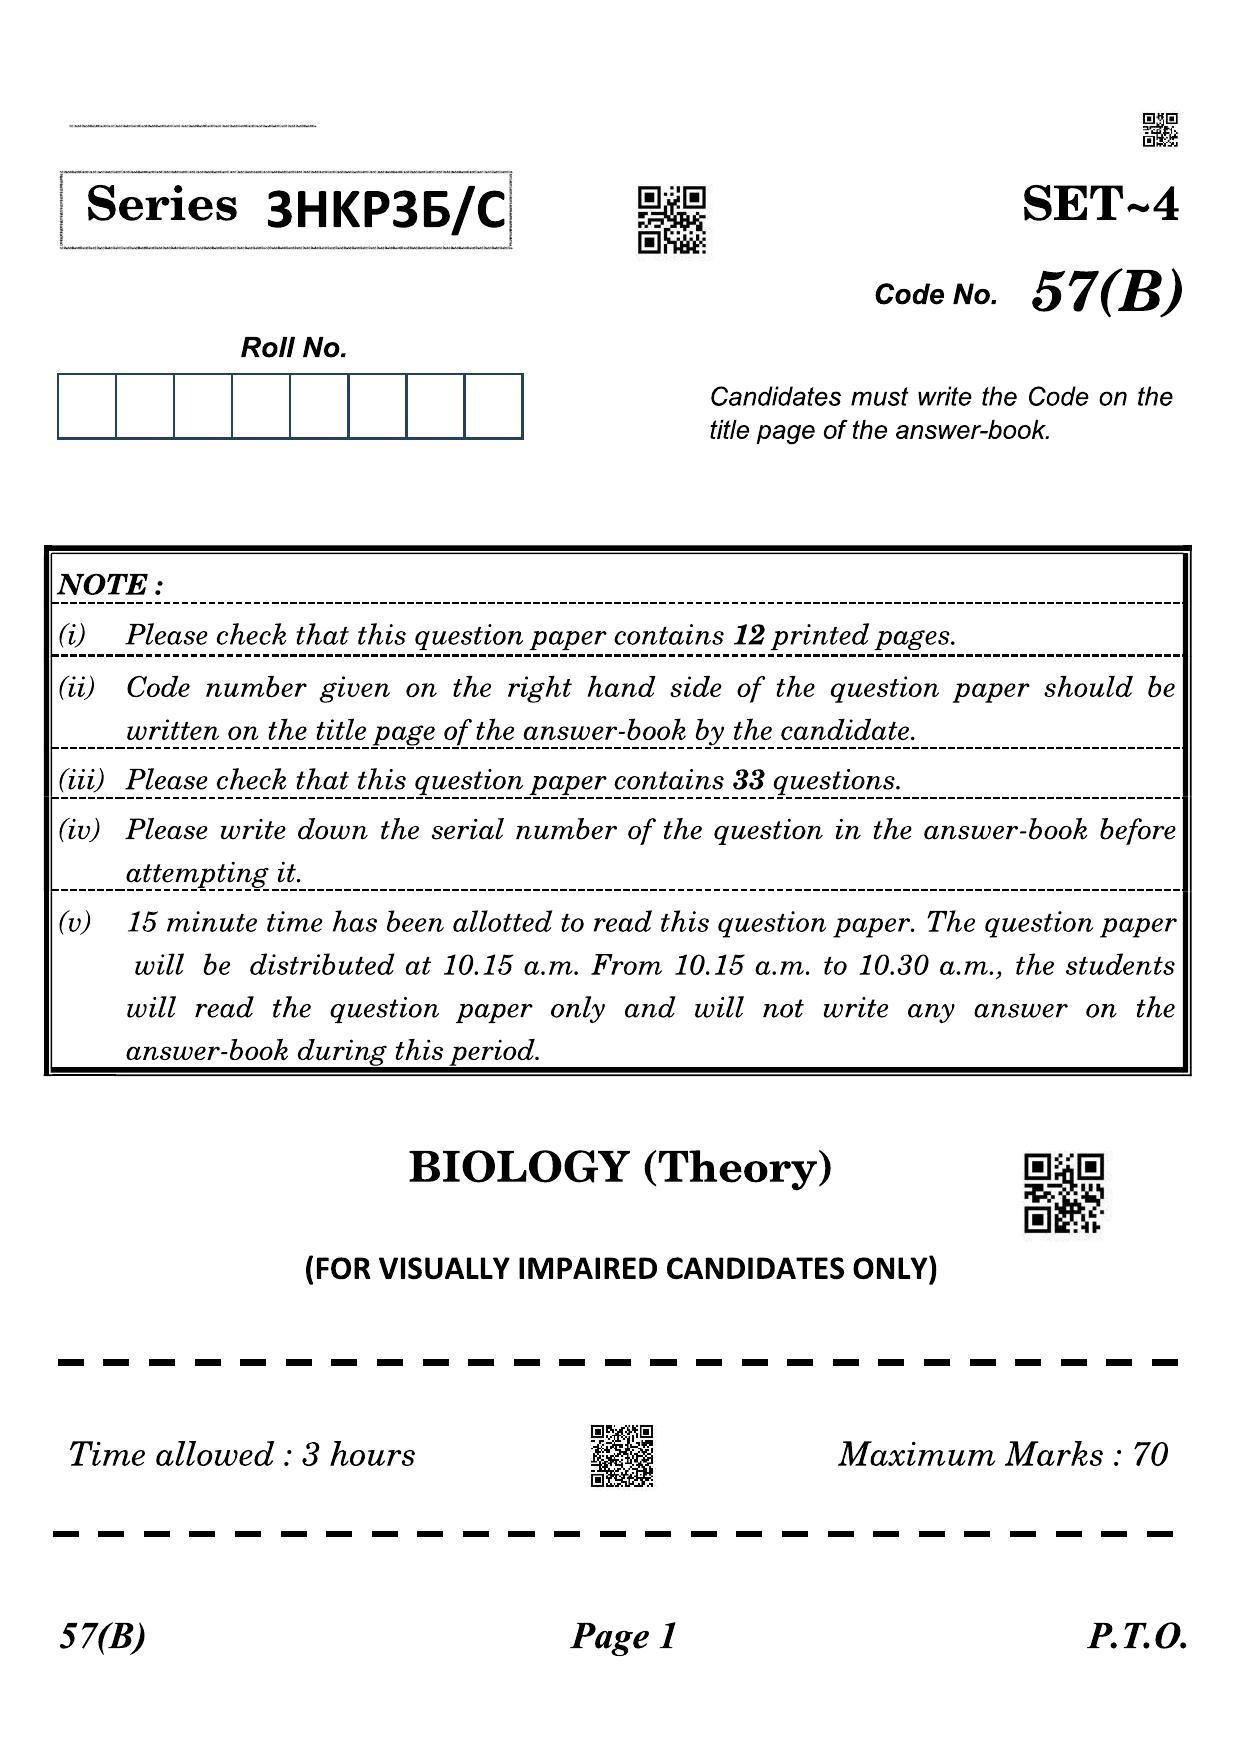 CBSE Class 12 QP_044_biology_for_visually_impared_candidates 2021 Compartment Question Paper - Page 1